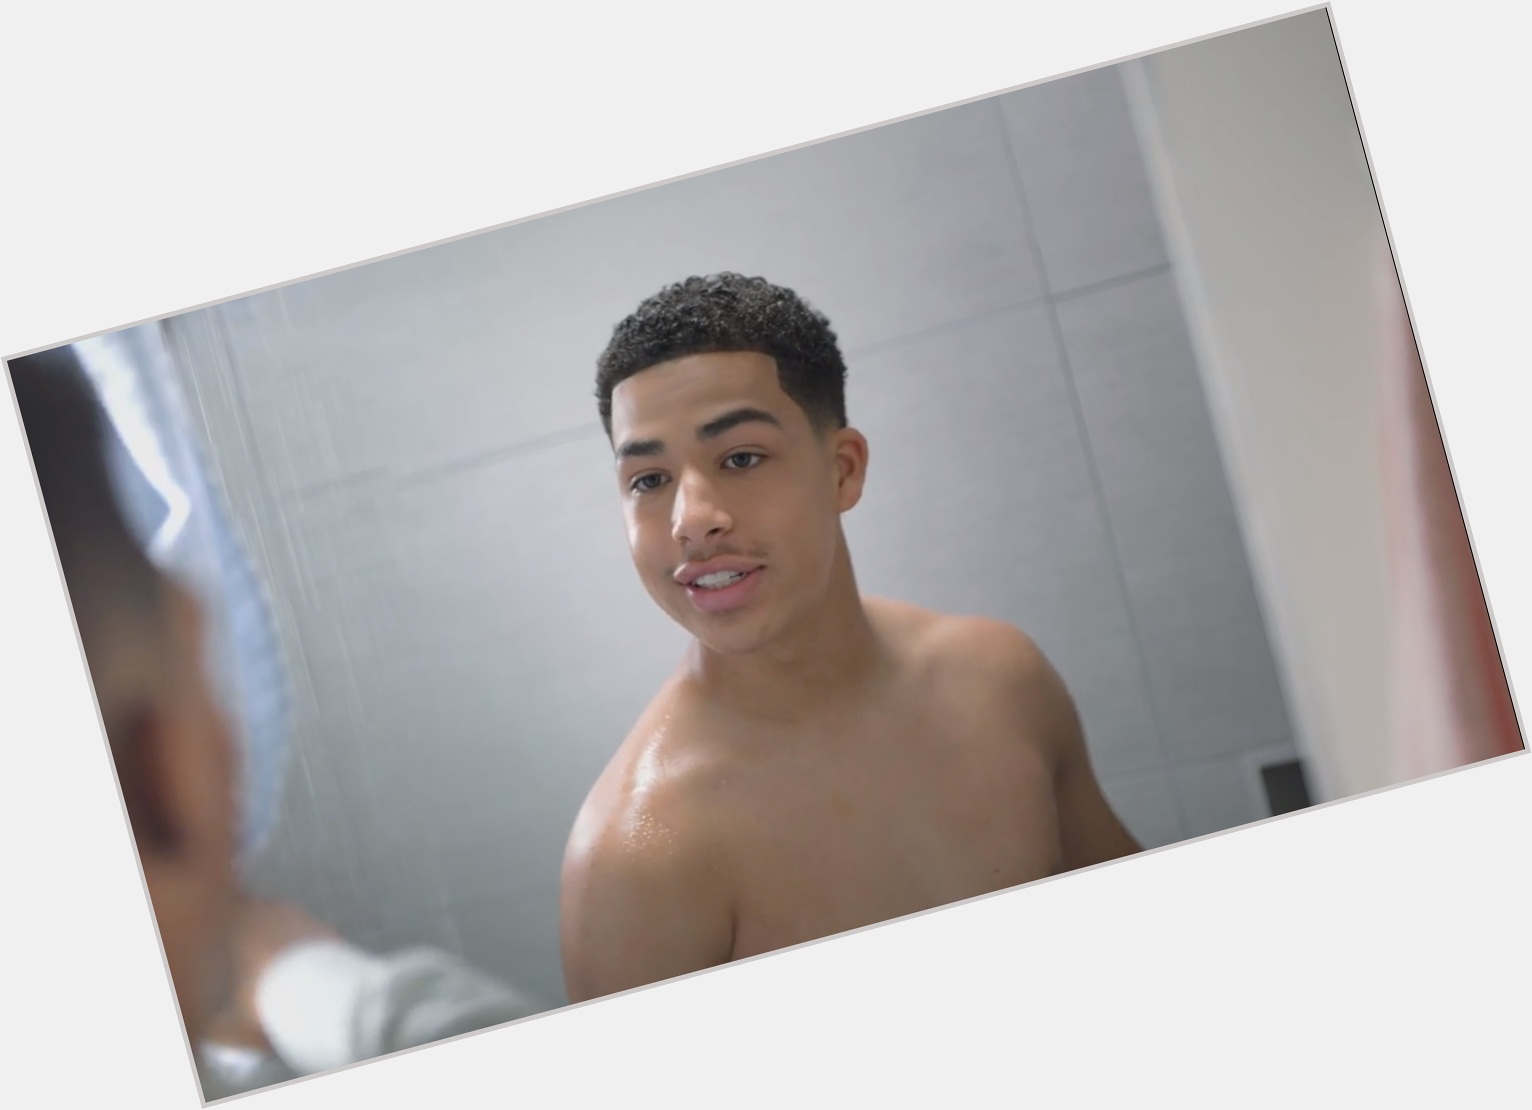 <a href="/hot-men/marcus-scribner/where-dating-news-photos">Marcus Scribner</a> Athletic body,  dark brown hair & hairstyles